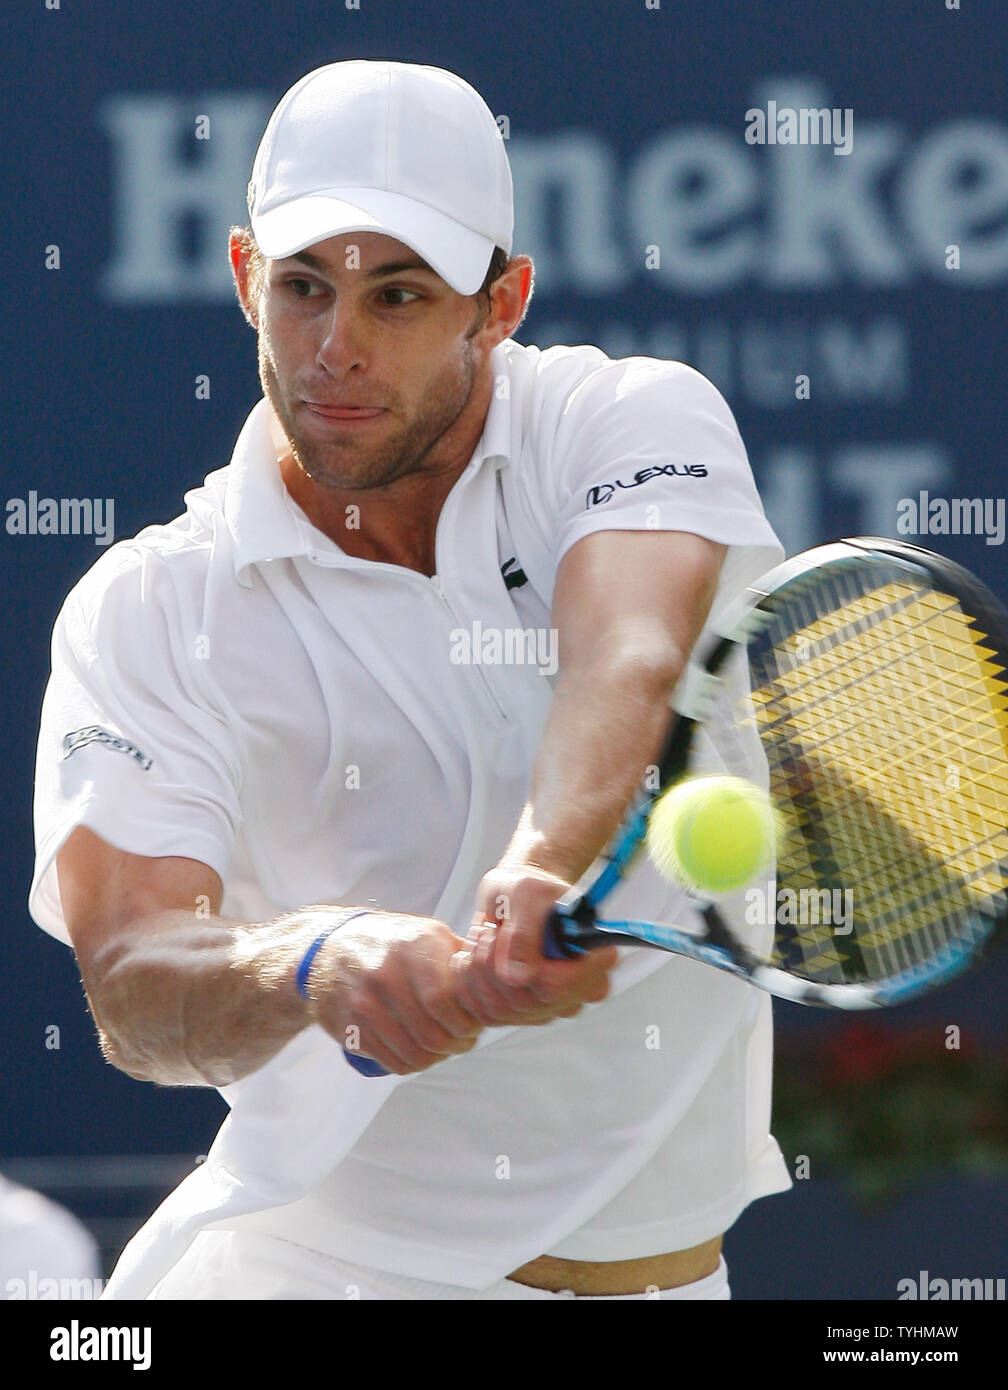 Andy Roddick hits a backhand during the second set of his match against Fernando Verdasco at the U.S. Open in Flushing Meadows, New York on September 3, 2006.  (UPI Photo/John Angelillo) Stock Photo